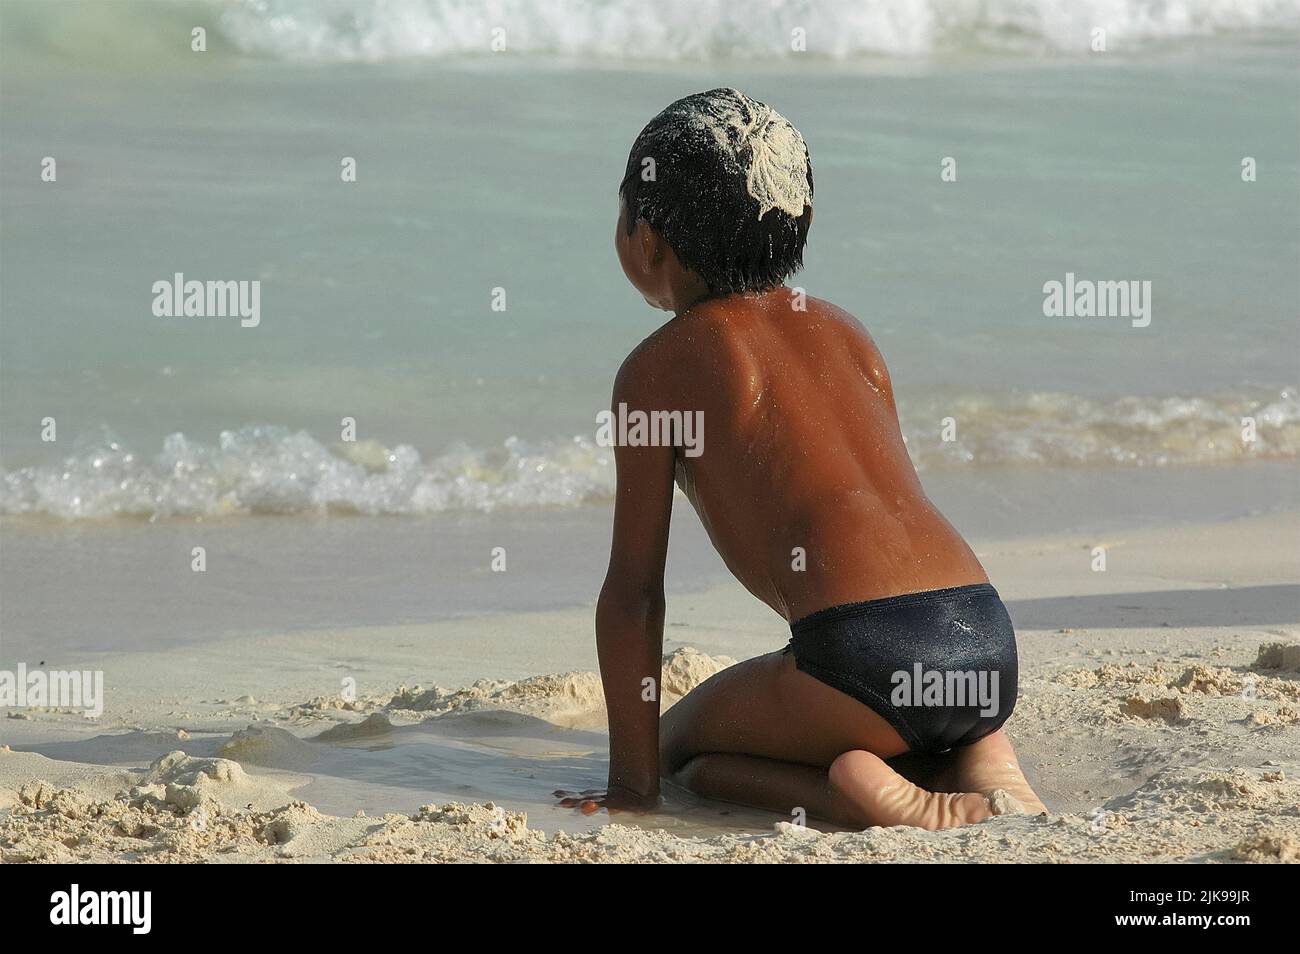 An unrecognizable Mexican teenager is played by the sea with sand in his hair on a summer day Stock Photo